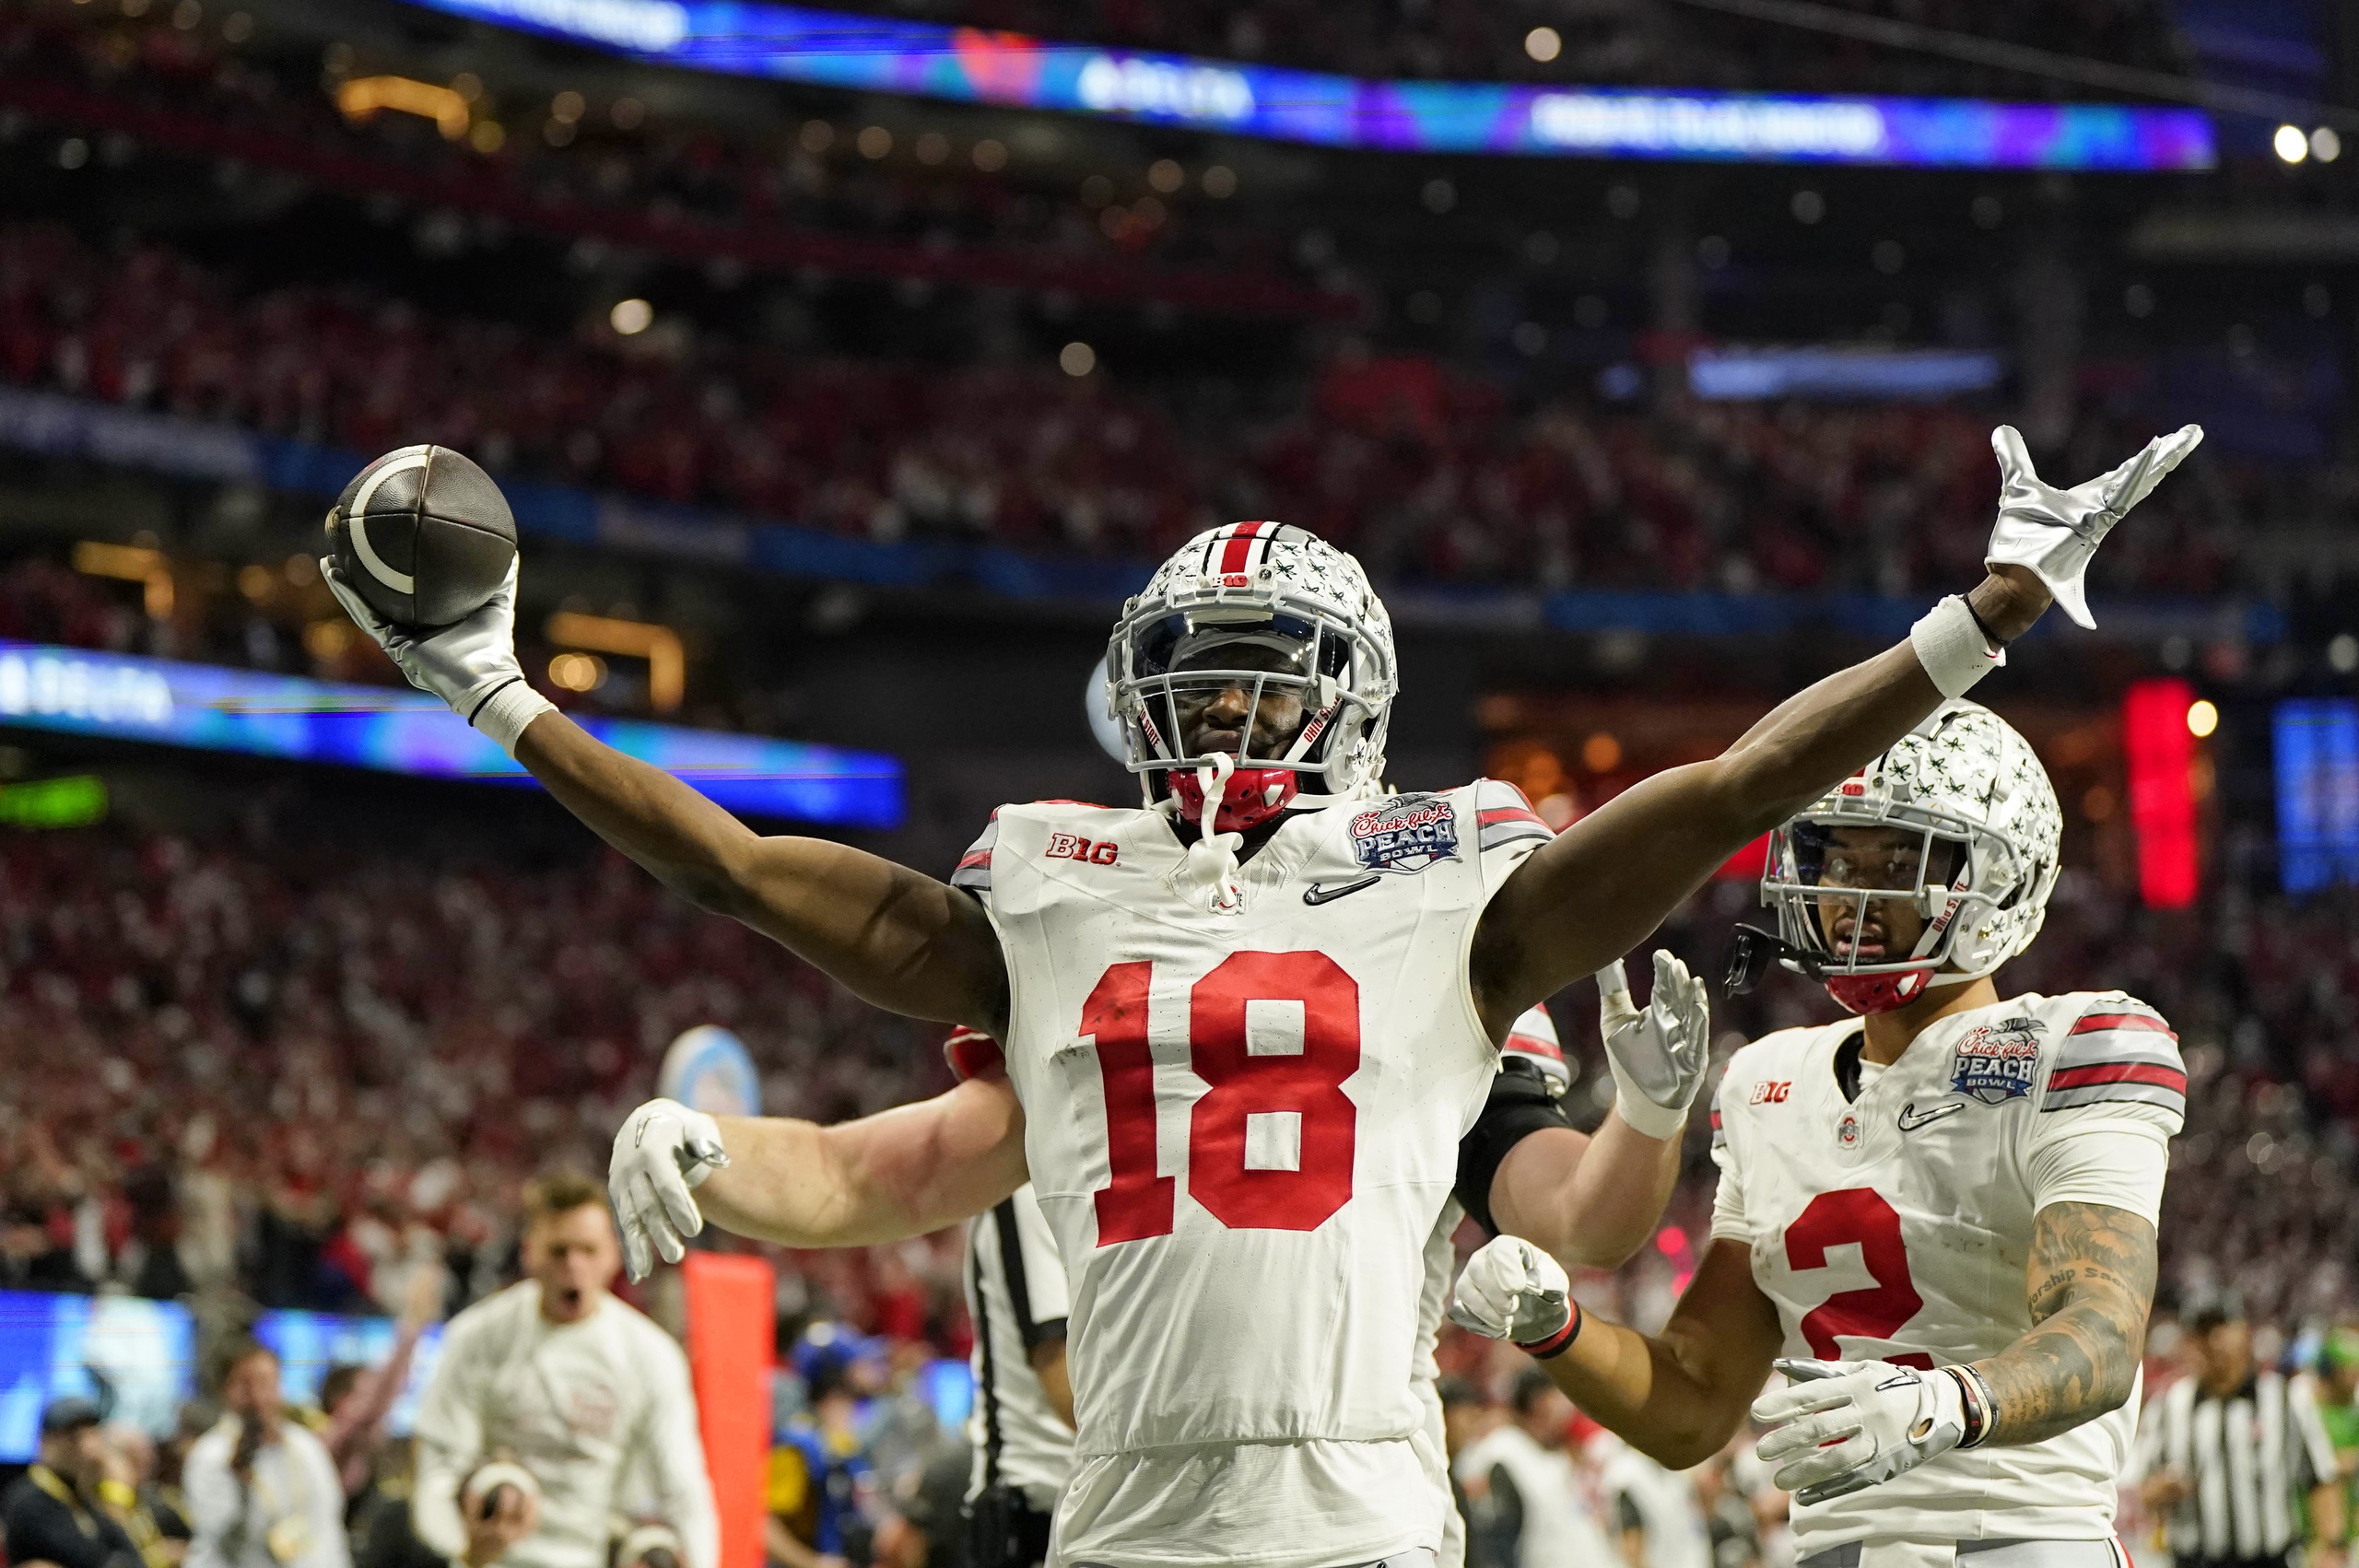 Ohio State Buckeyes Preview: Roster, Prospects, Schedule, and More